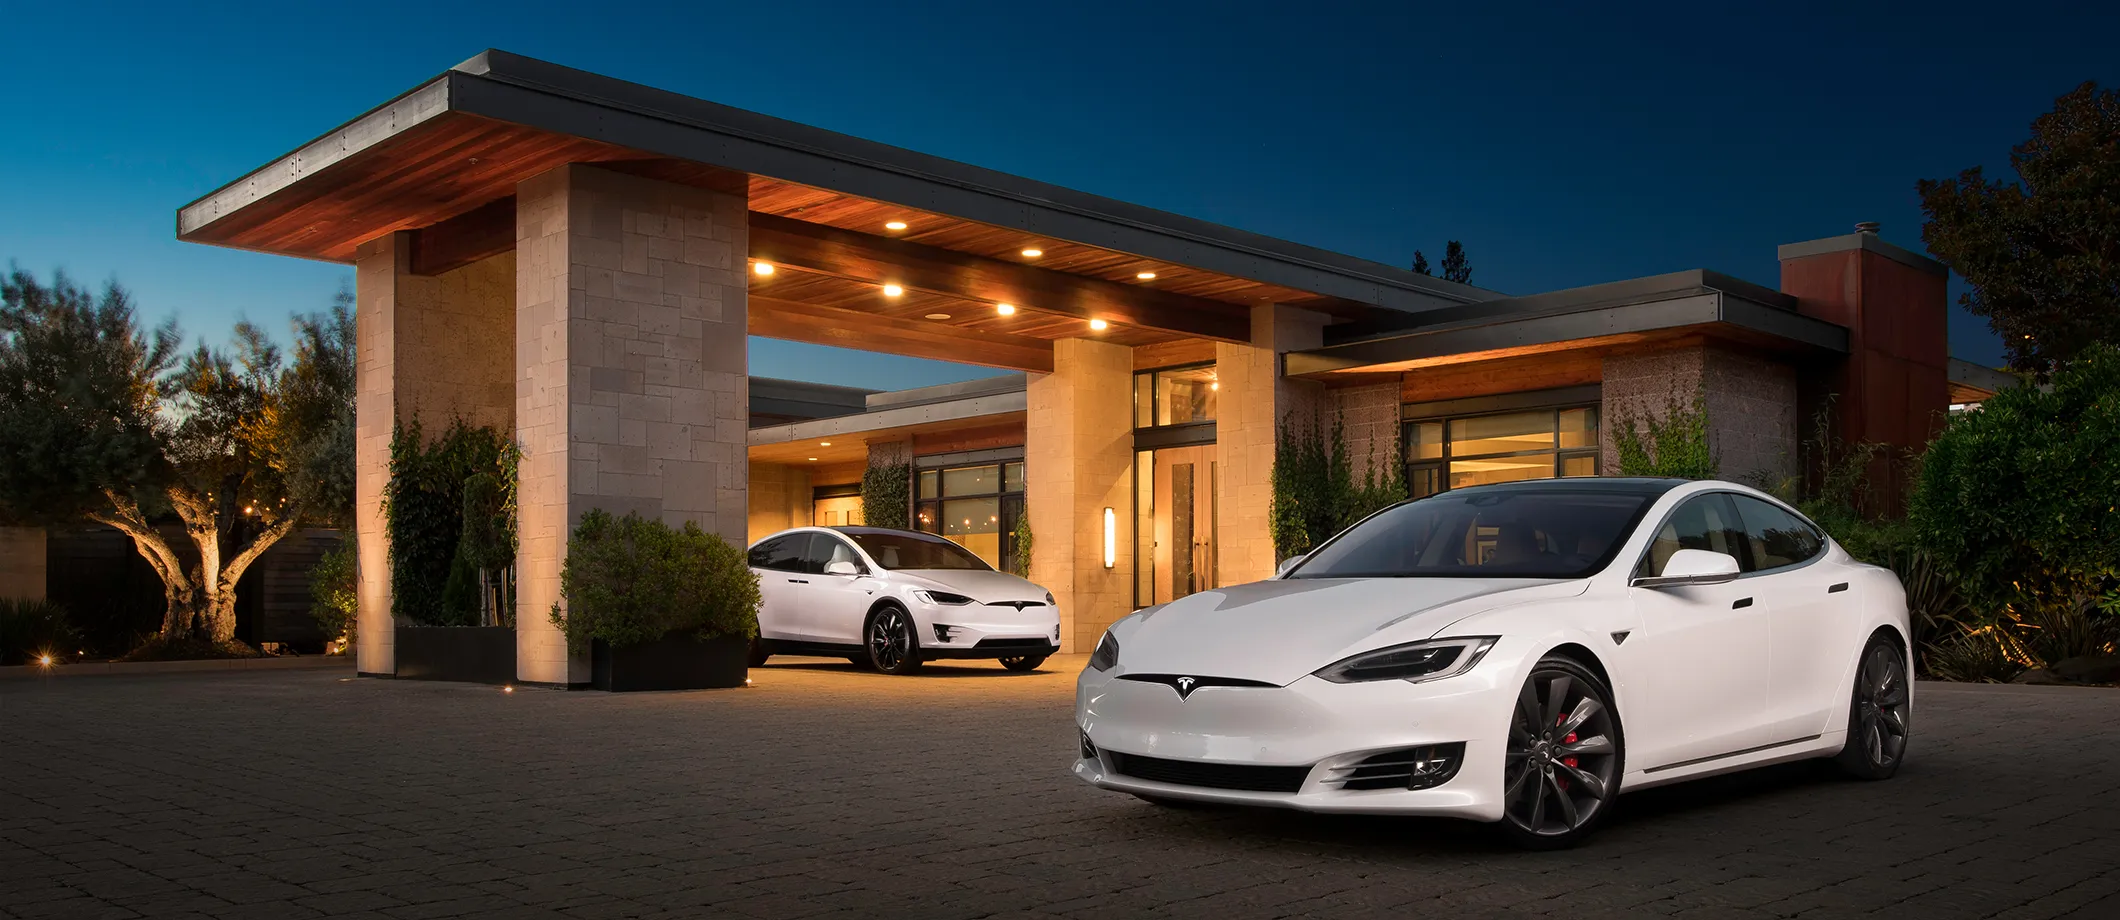 Shocking Drop: Why Tesla Cars Lose Value Fast and What It Means for Your Wallet